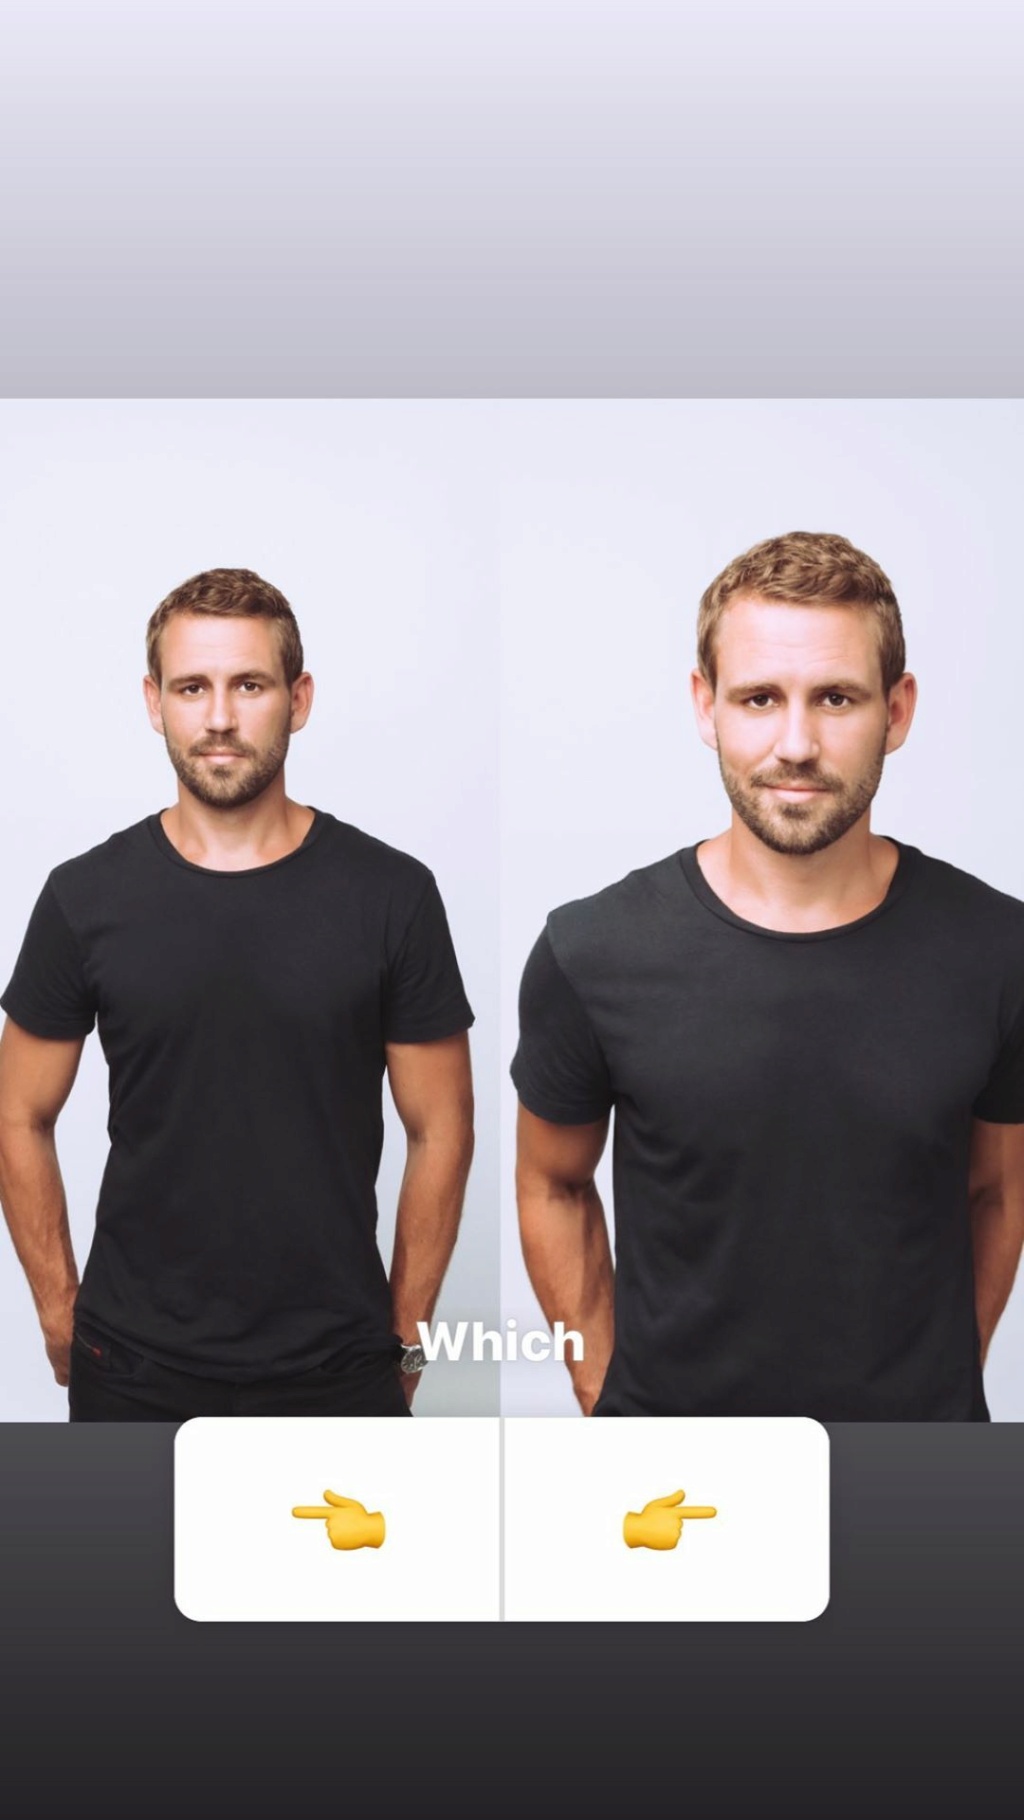 nick viall - Nick Viall - Bachelor 21 - FAN Forum - Discussion #27 - Page 79 11839510